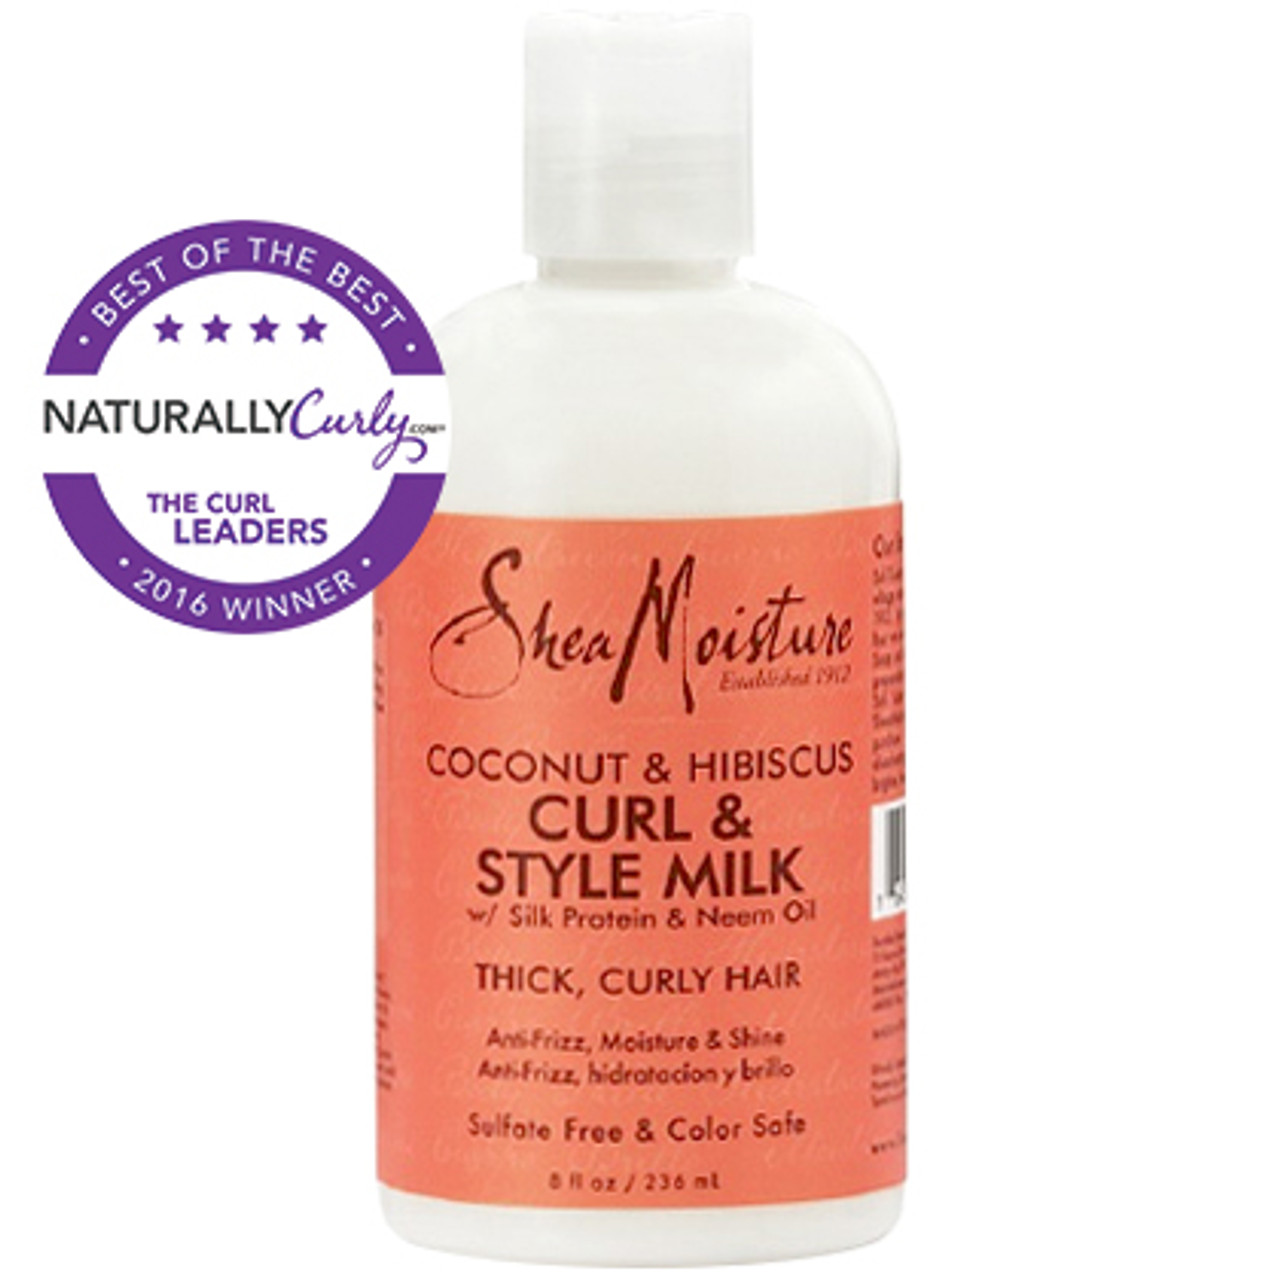 SheaMoisture Coconut & Hibiscus Curl & Style Milk (8 oz.) - NaturallyCurly